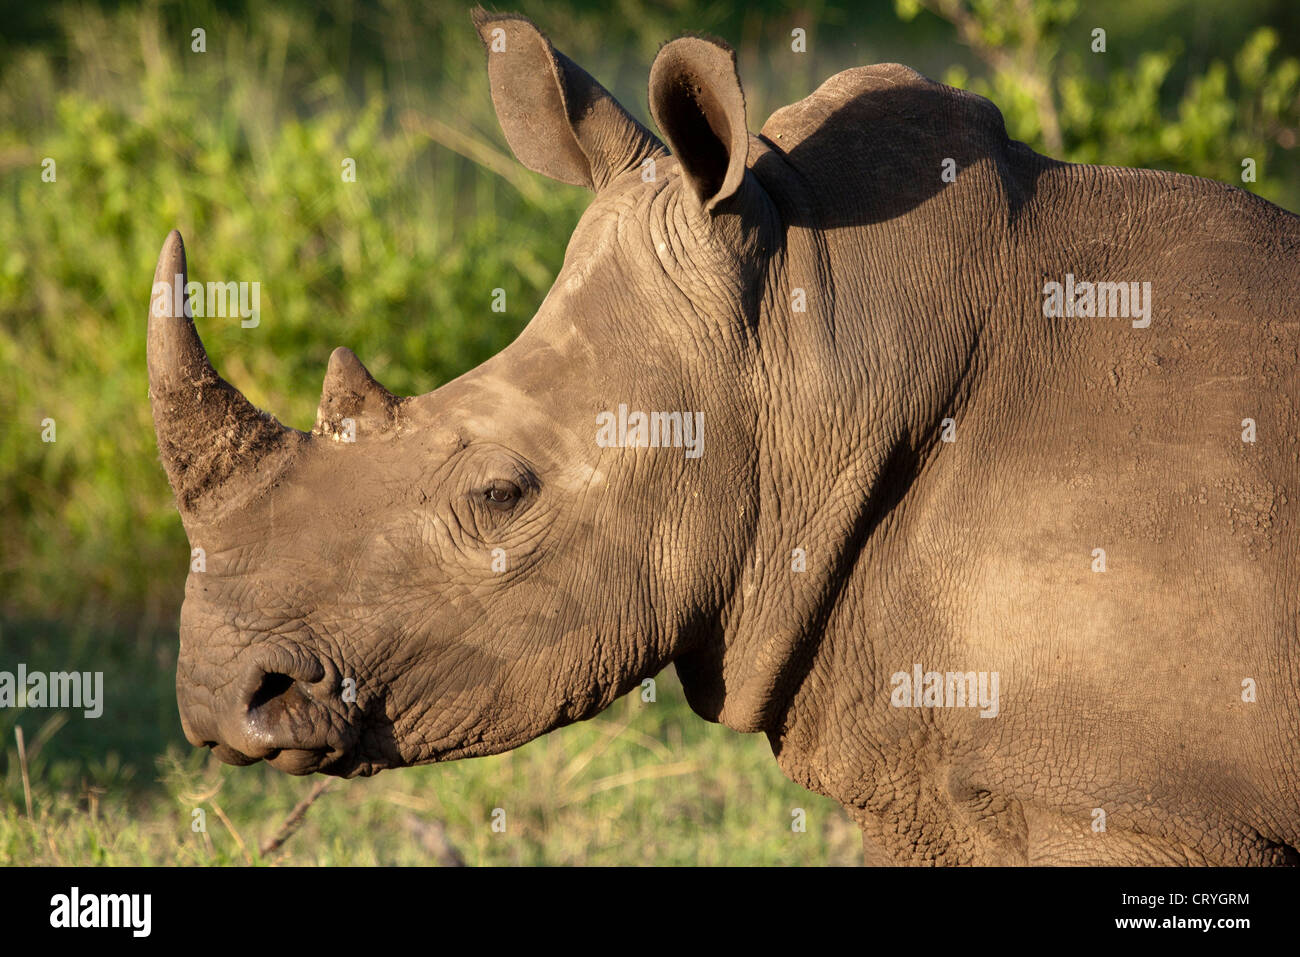 Portrait of a young white rhino Stock Photo